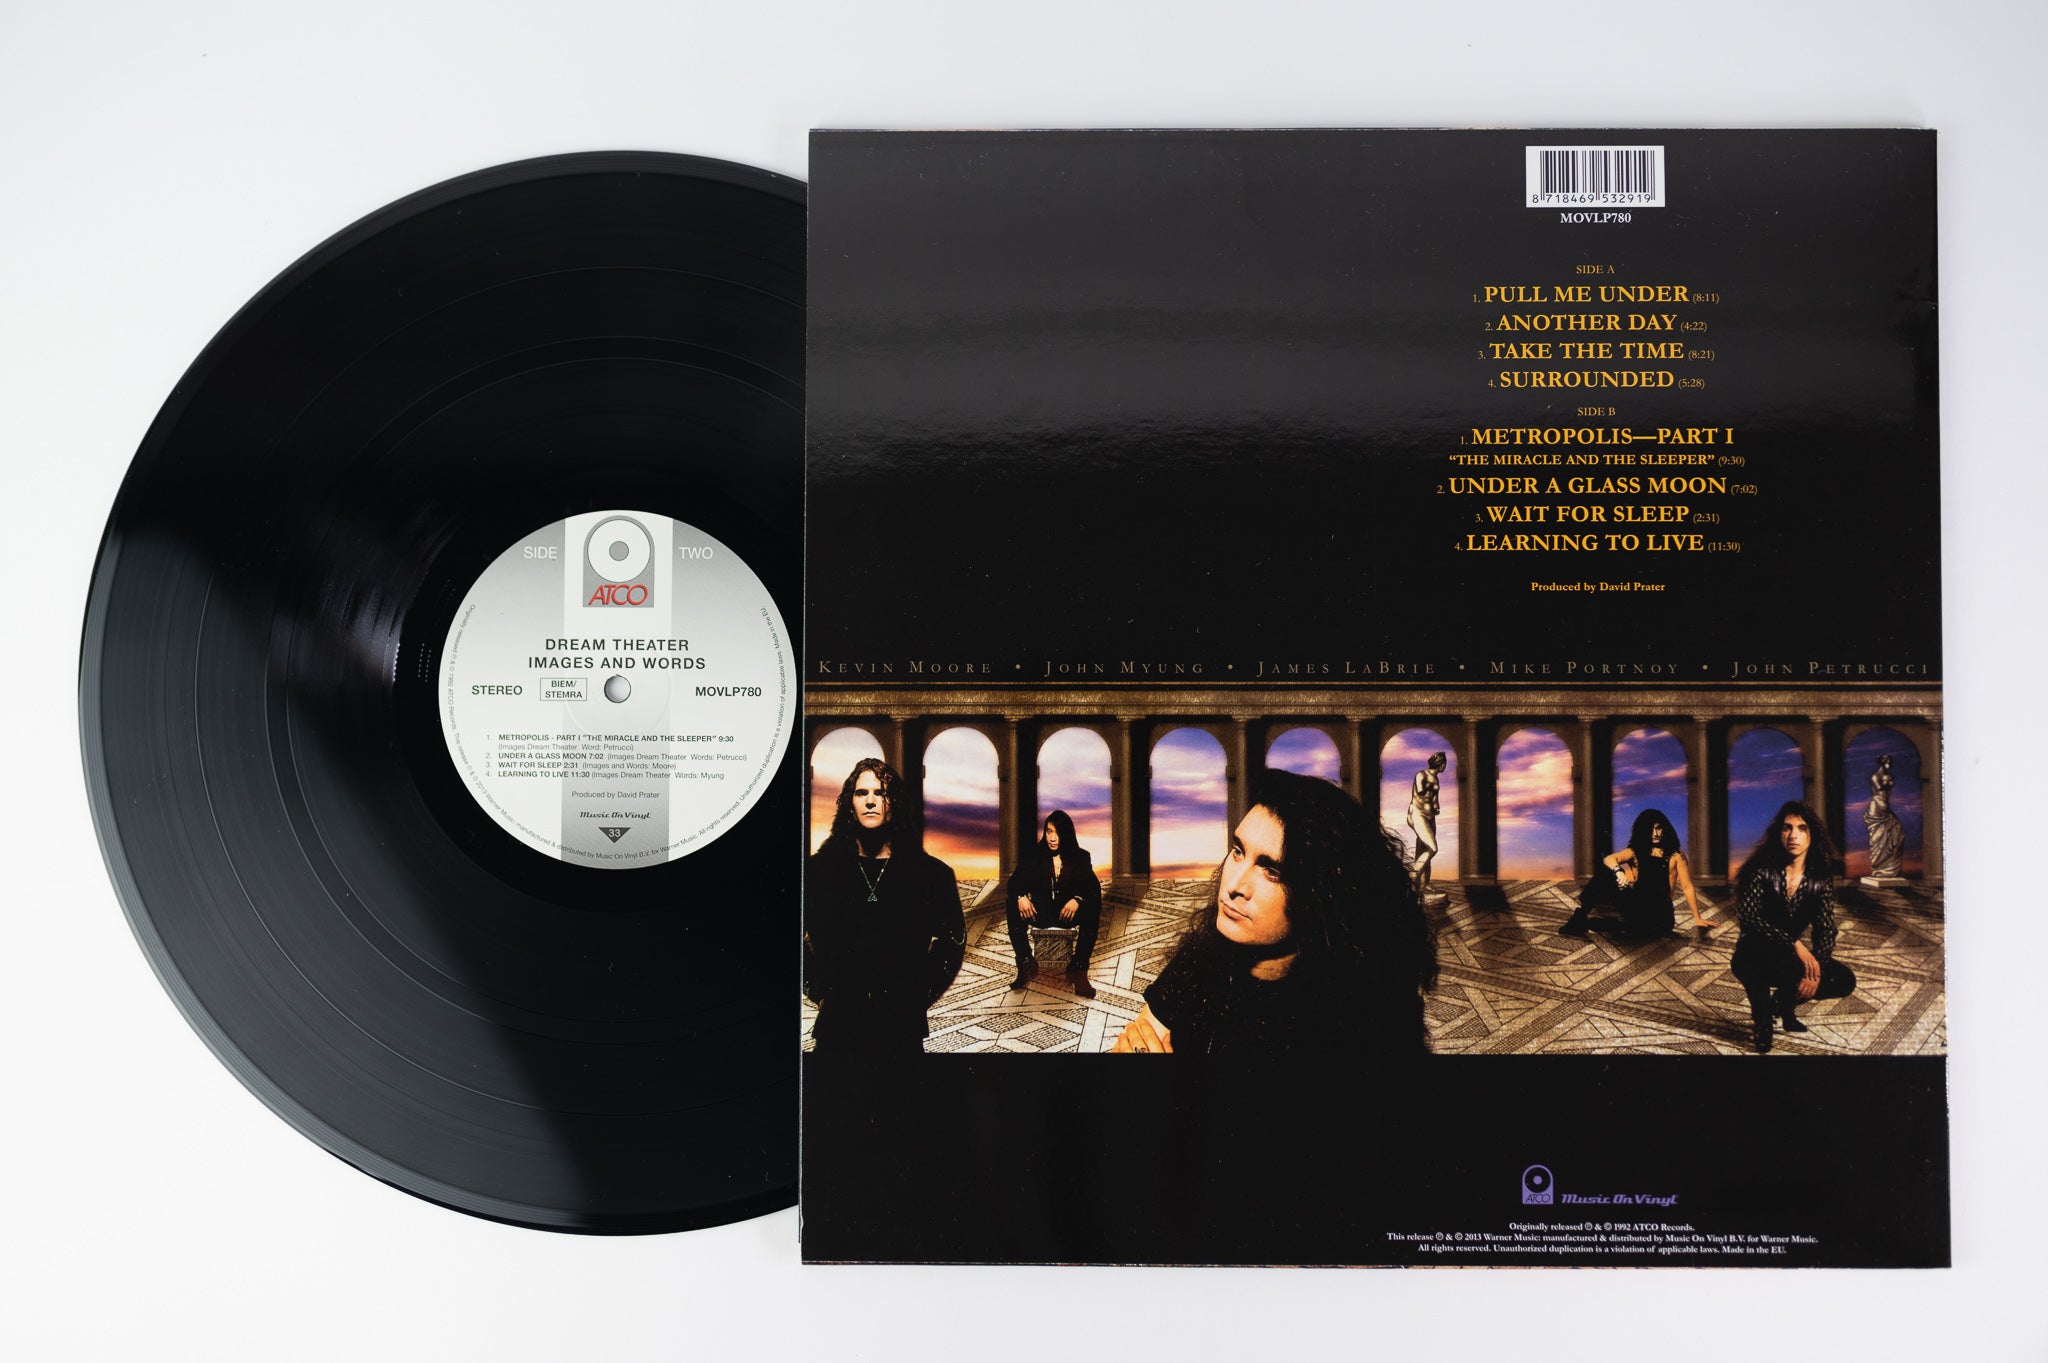 Dream Theater - Images And Words - Music On Vinyl Pressing